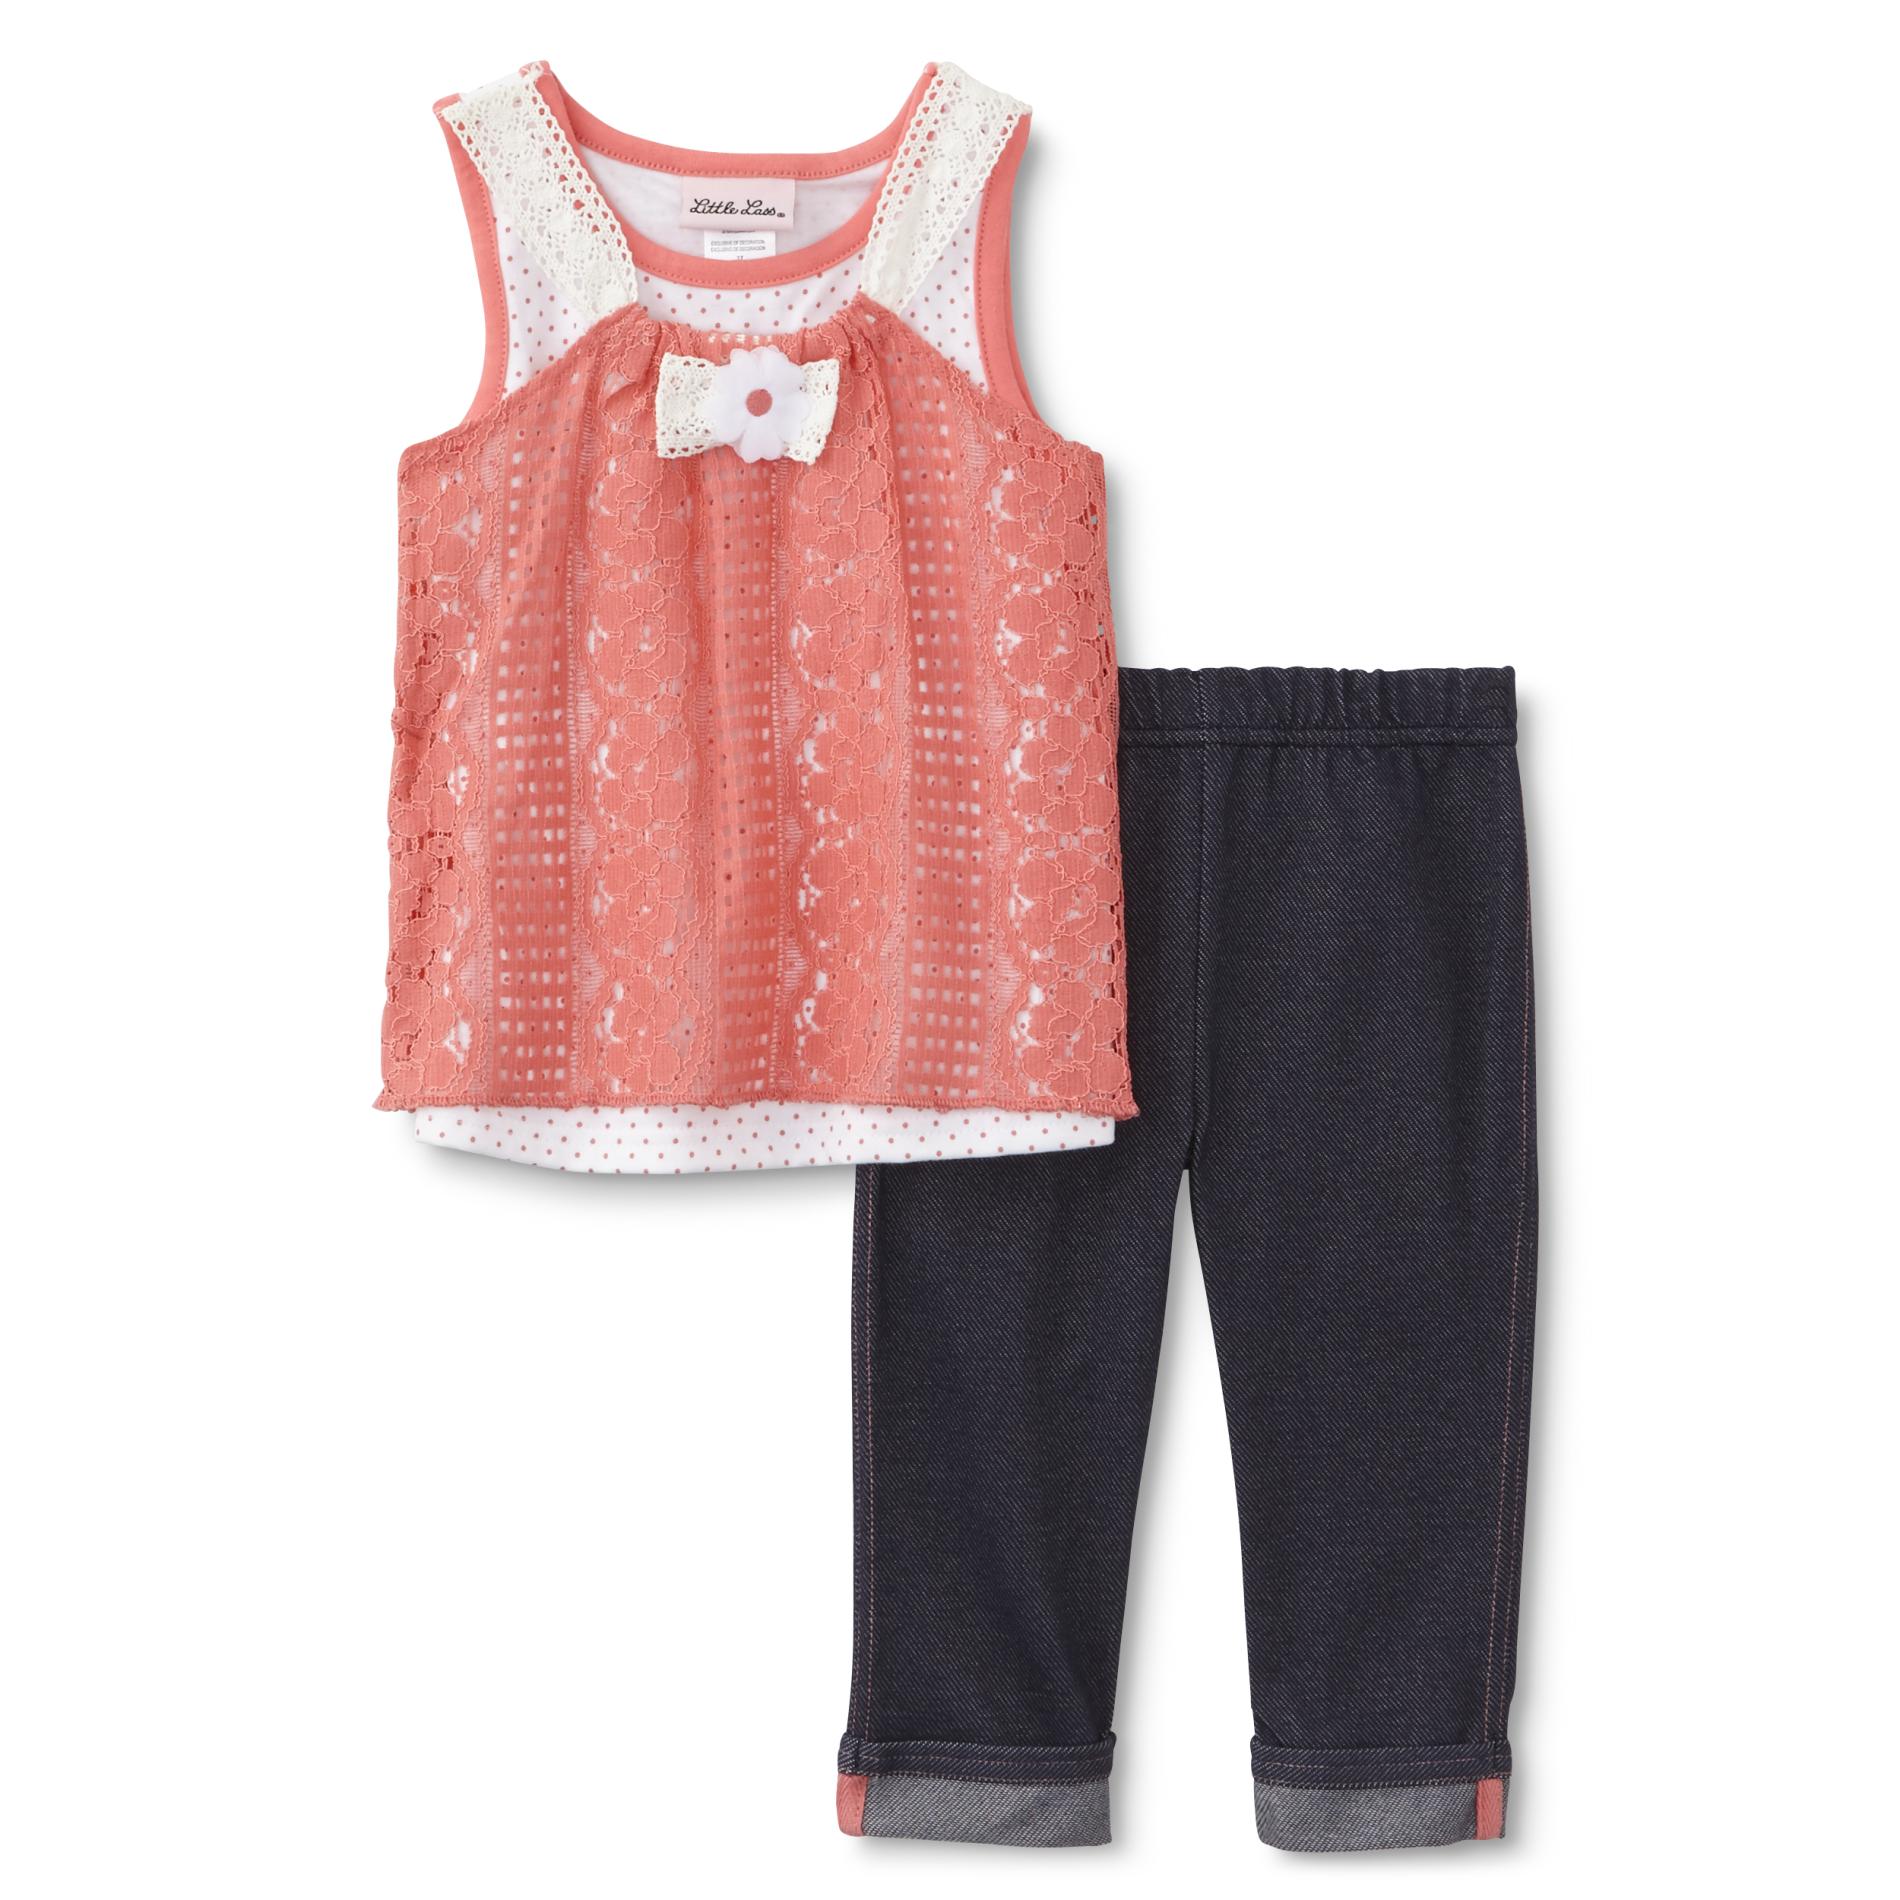 Little Lass Infant & Toddler Girl's Layered-Look Top & Leggings - Dots